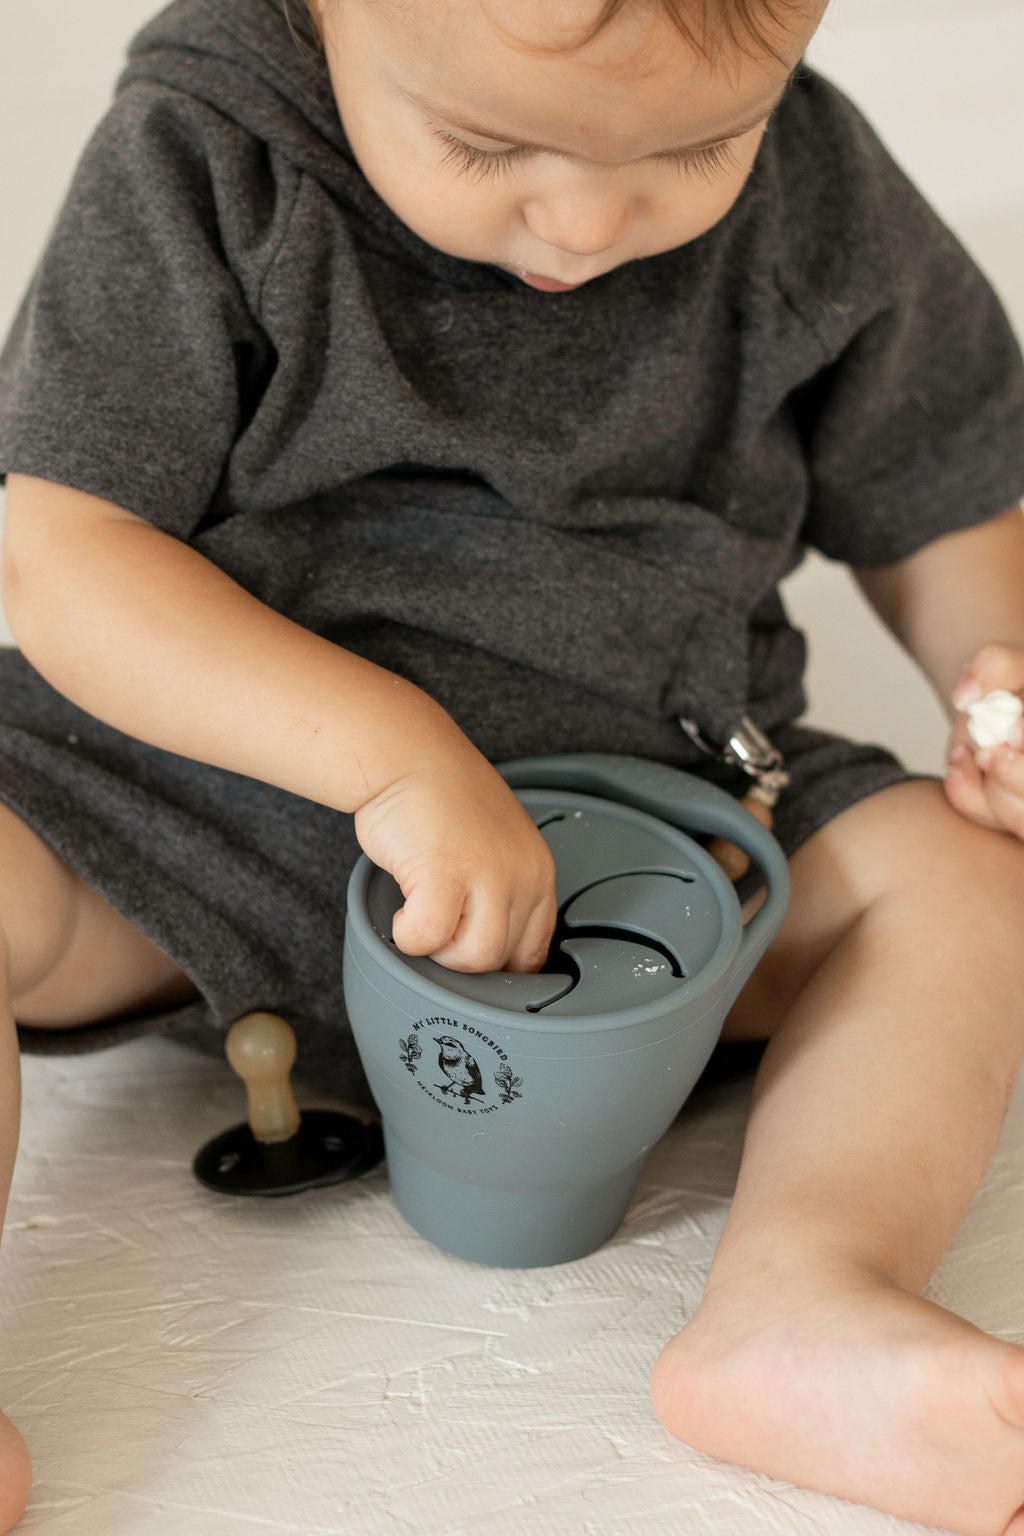  Foldable Snack Cup for Toddlers and Babies - Non